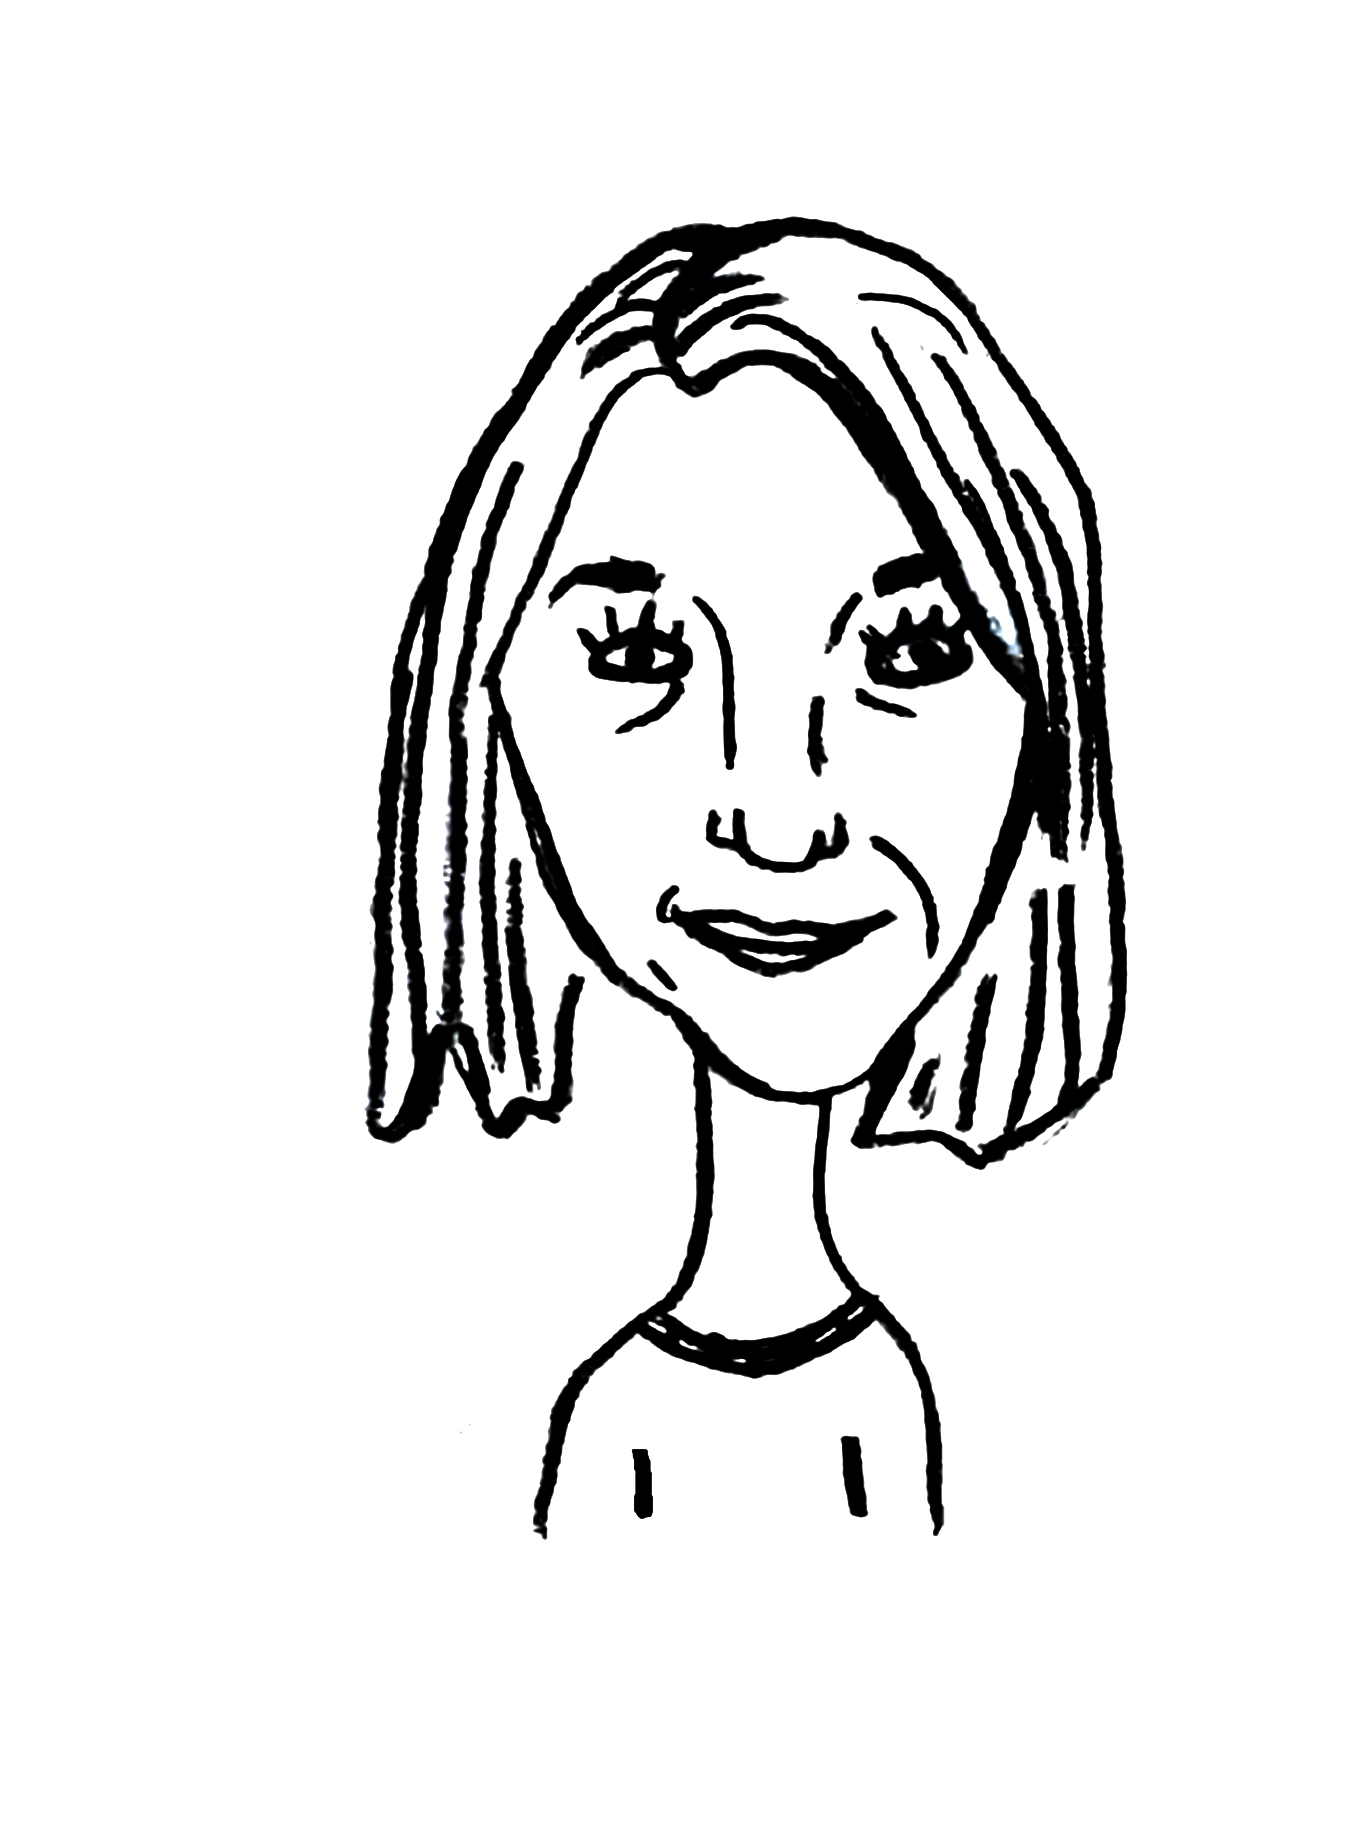 Sketched Caricature of Yael Glosser